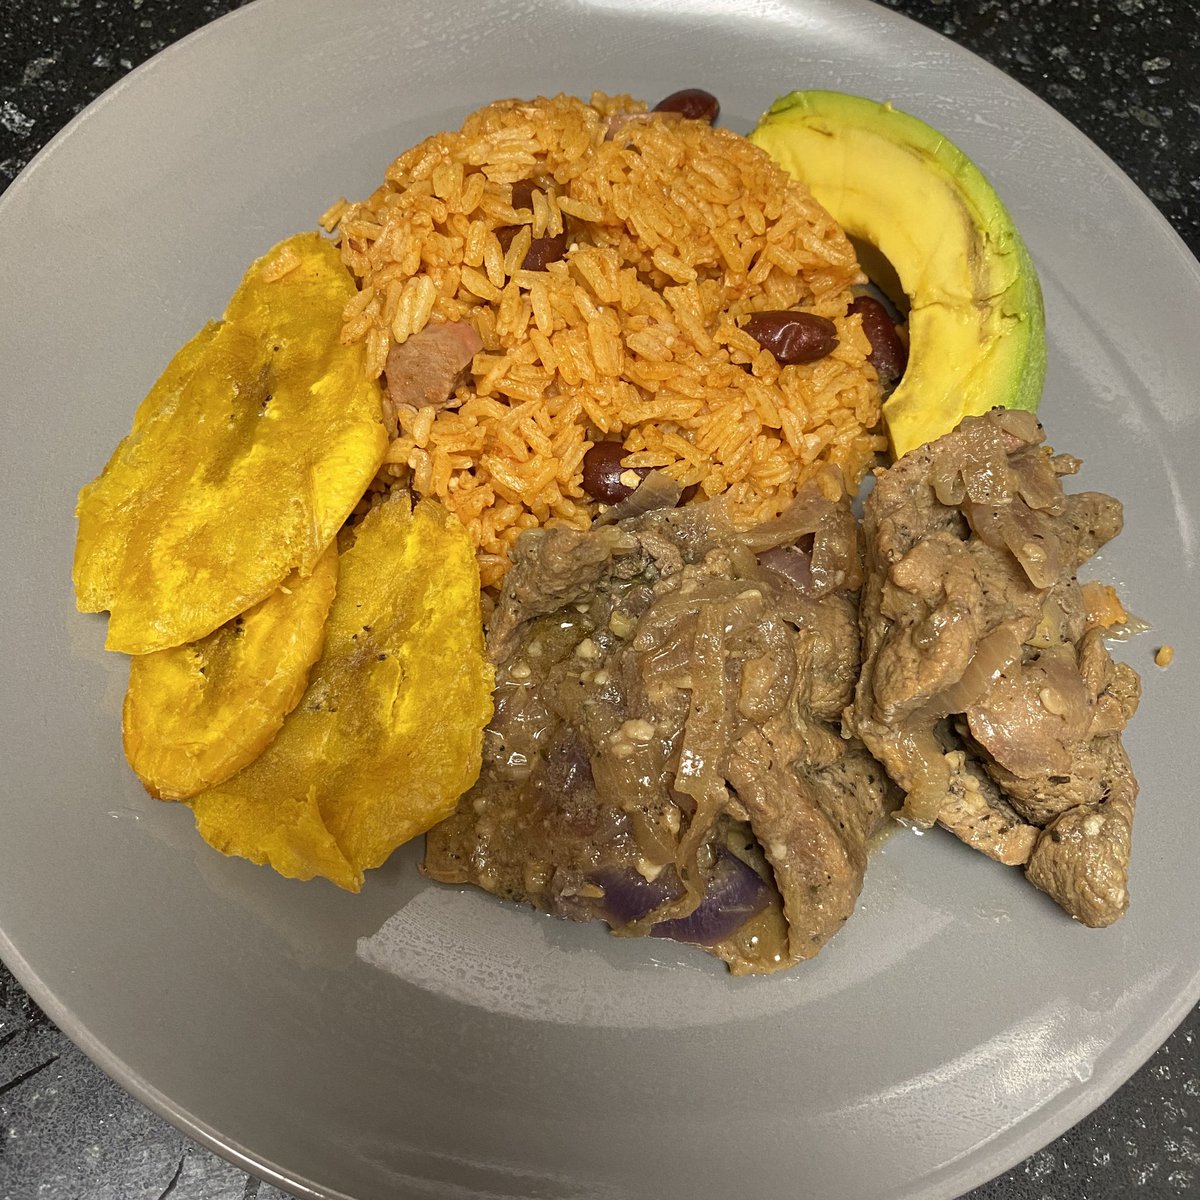 Arros con habichuelas, steak smothered in onions, fried plantains & I had to throw some avocado in there! That’s a taste of what goes down in the Diaz kitchen! #CookingWithEmpire @OneNYNJ @TeamEmpire_NYNJ @MaxAcevedo8